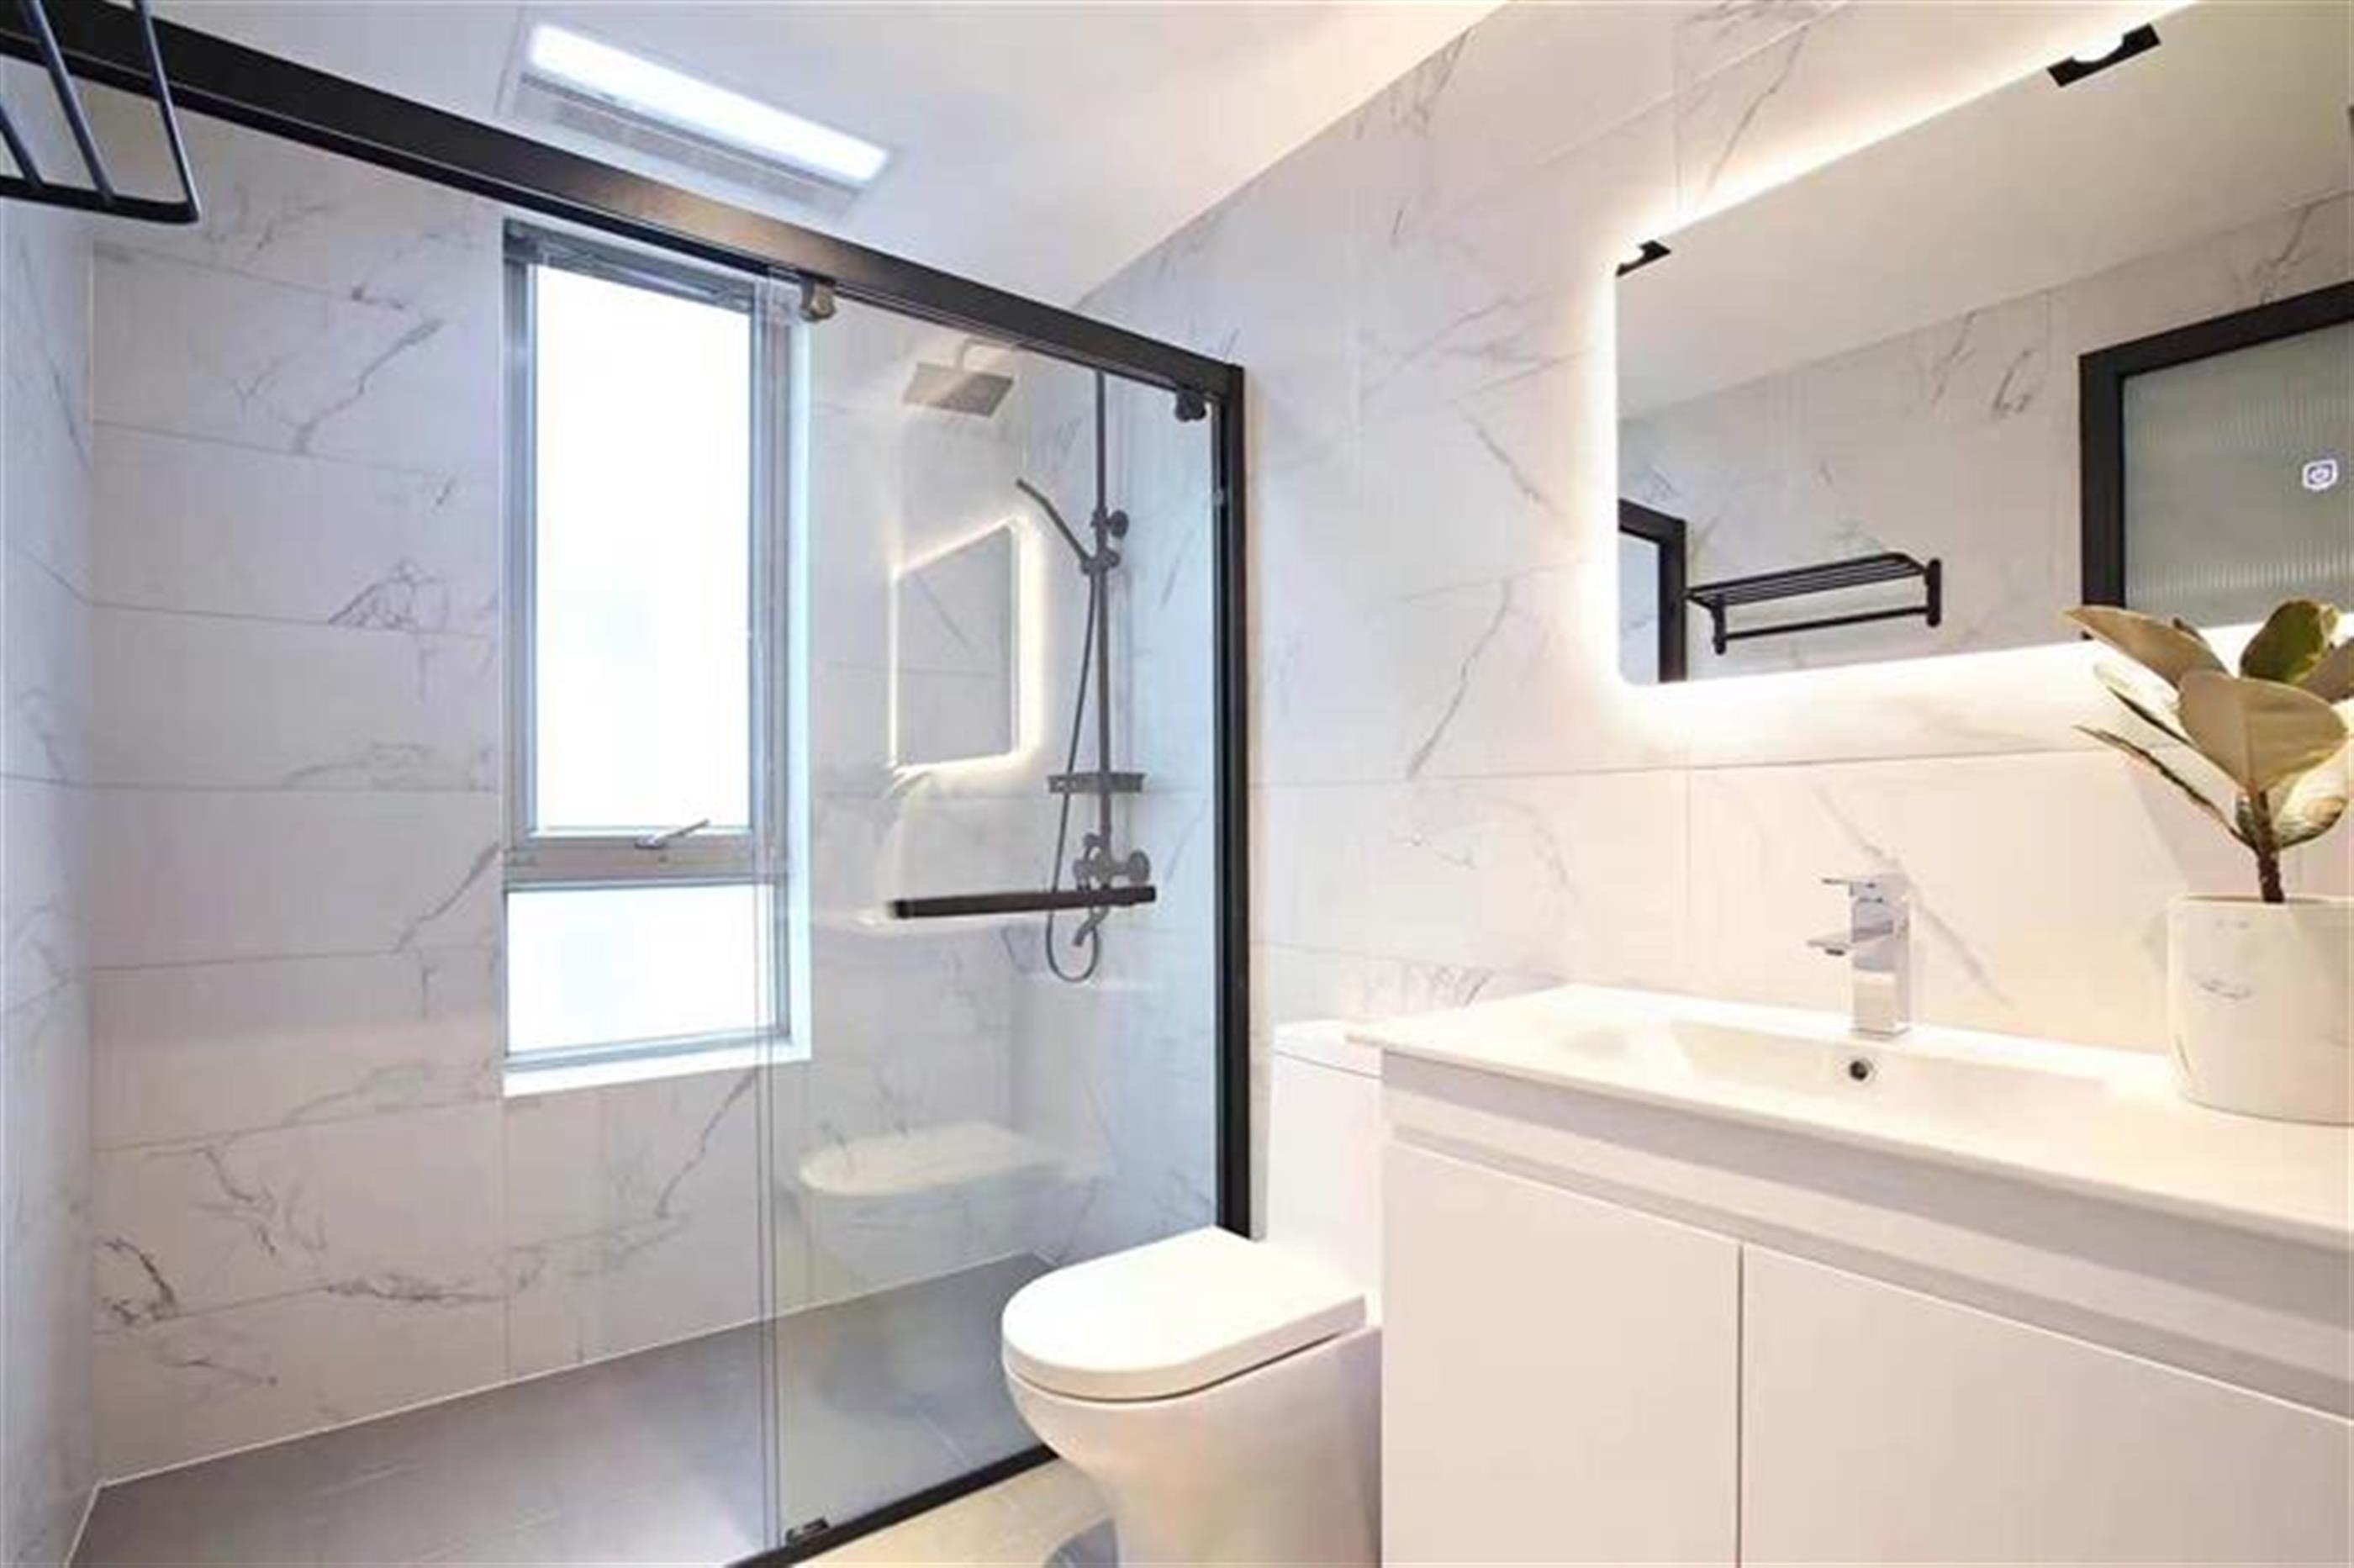 big shower Newly-decorated Modern Bright Spacious 4BR Xintiandi Duplex for Rent in Shanghai LN 10/13